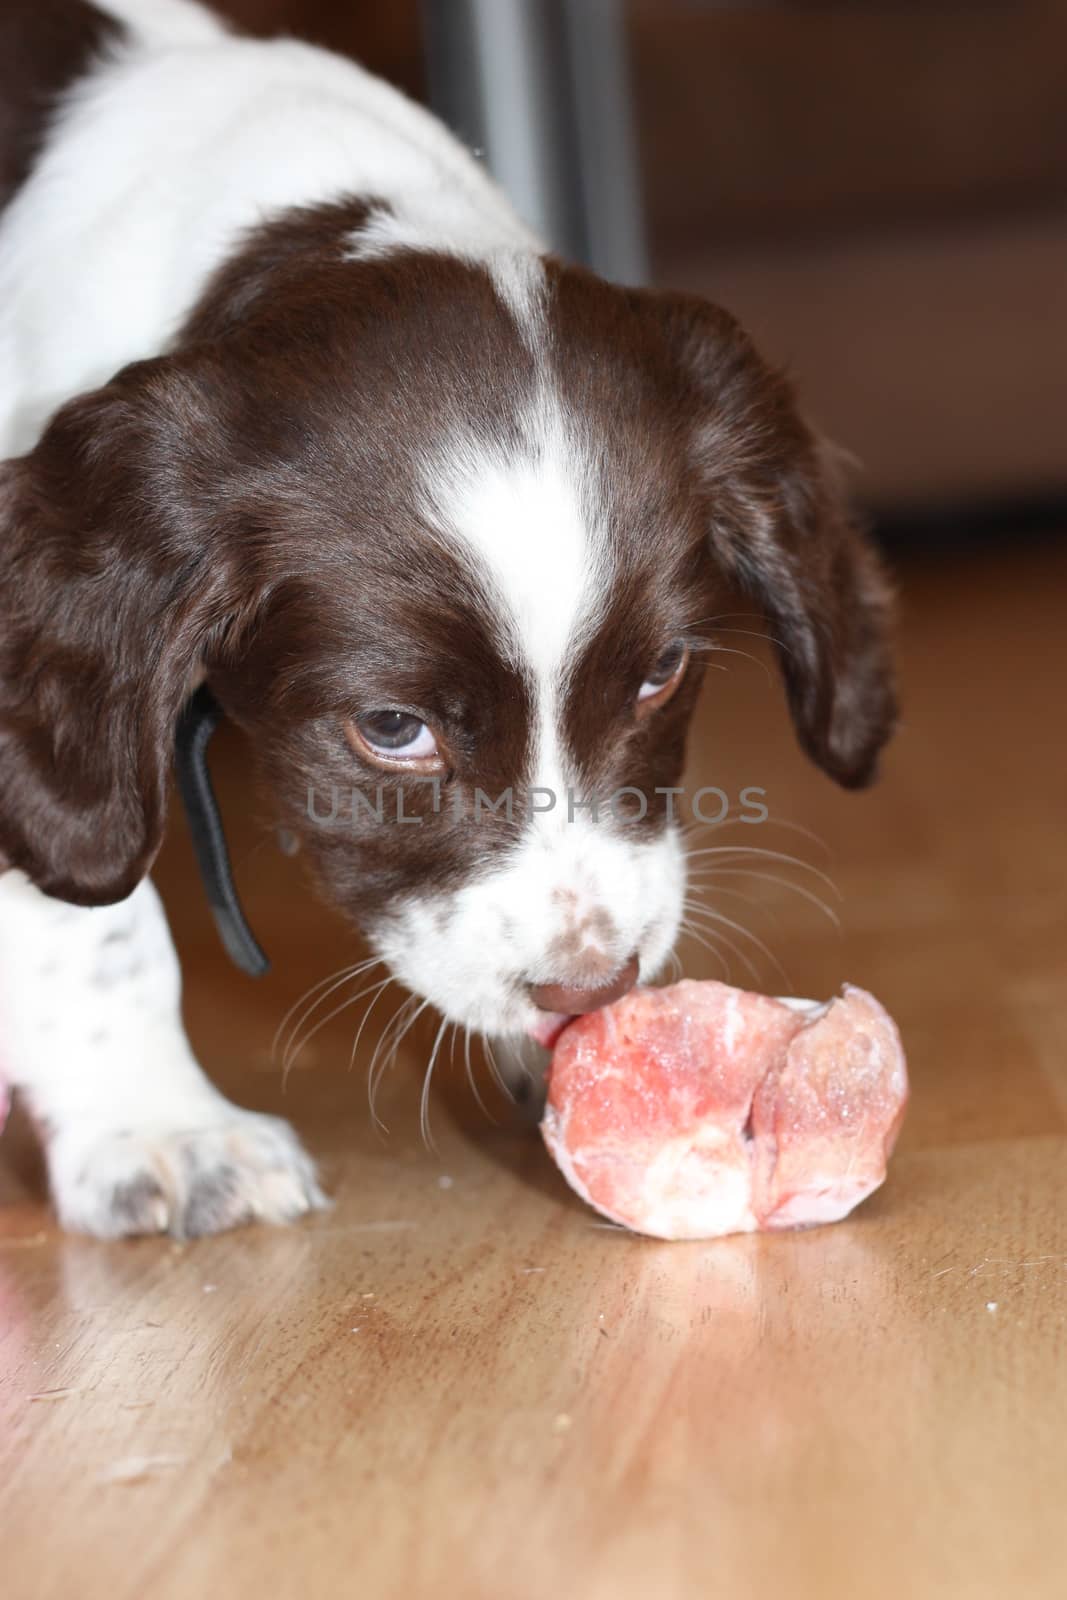 young working type english springer spaniel puppy eating raw mea by chrisga